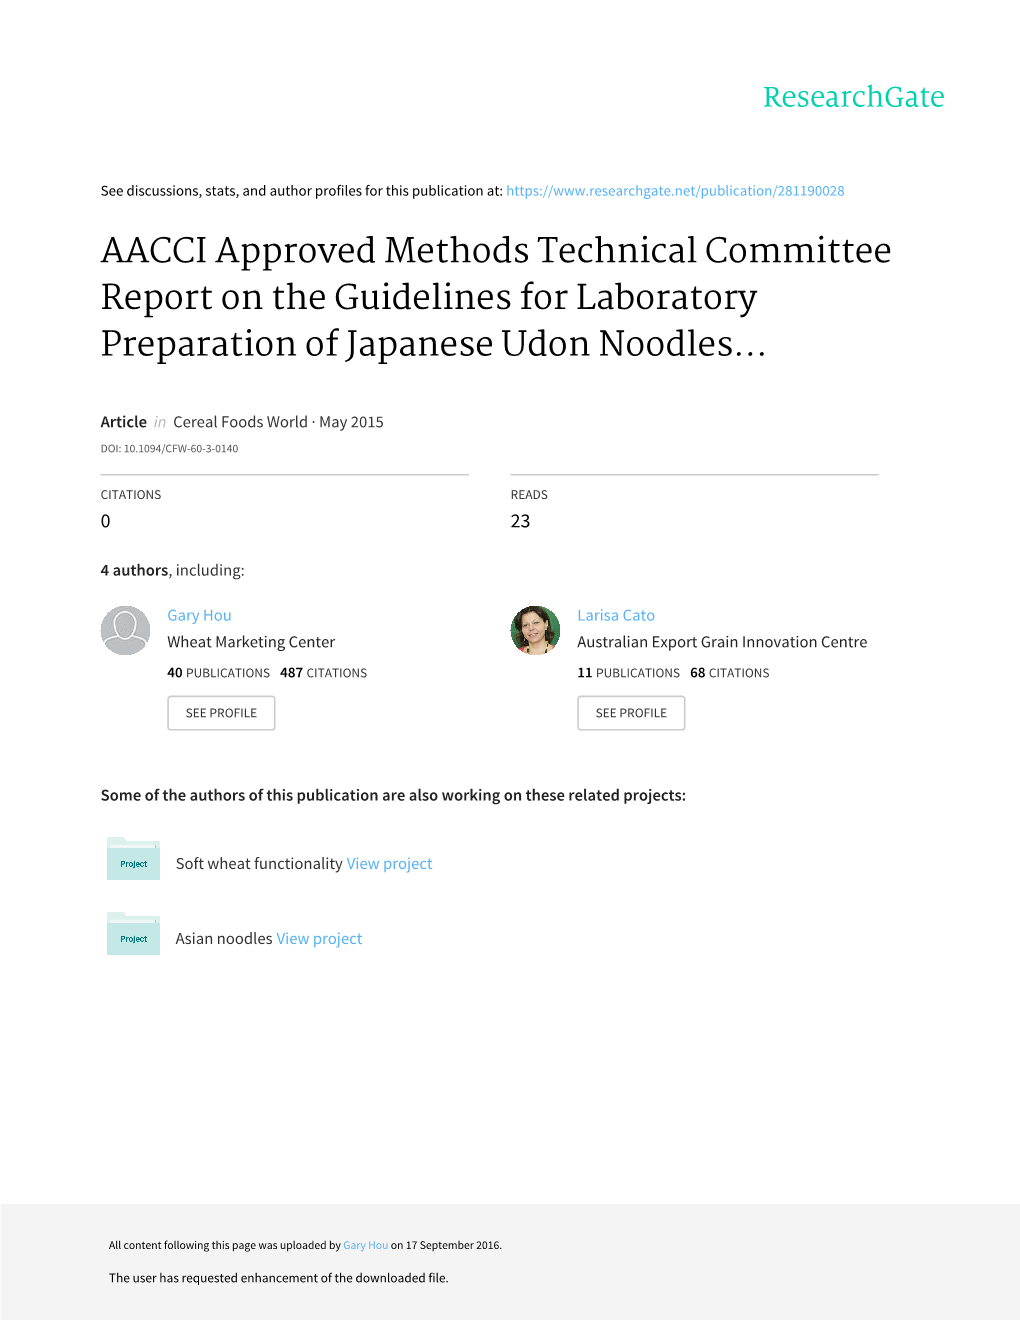 AACCI-Udon-Noodle-Guidelines.Pdf